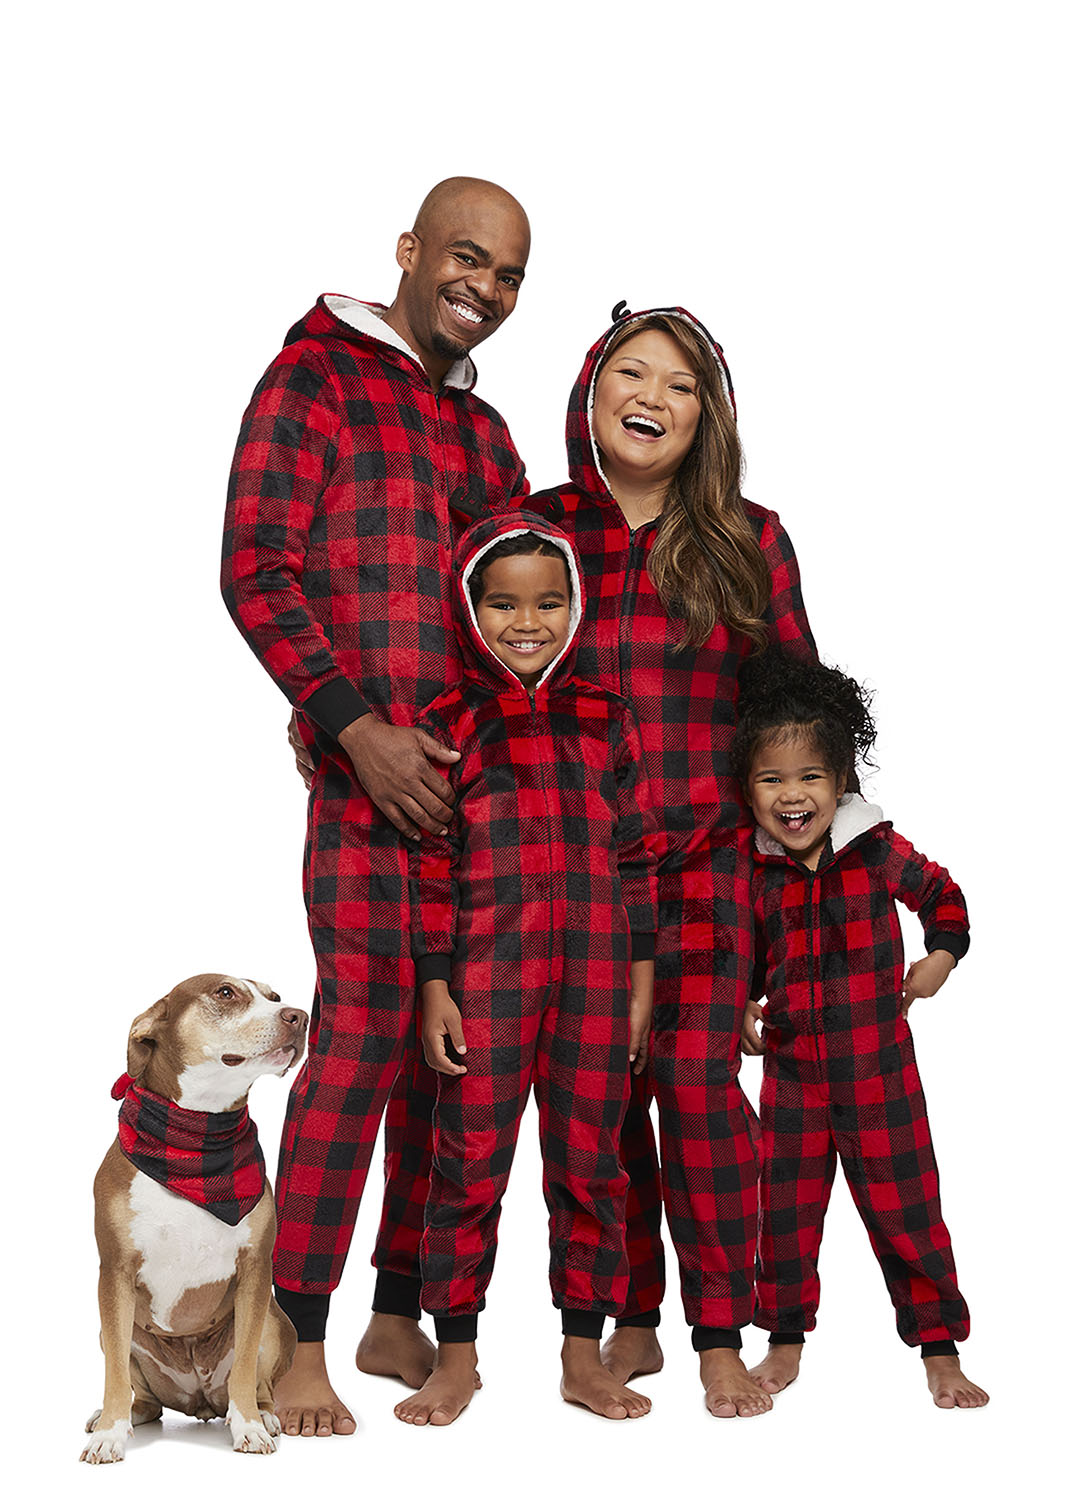 Jolly Jammies Toddler Buffalo Plaid Matching Family Pajamas Union Suit, Sizes 2T-5T - image 1 of 10